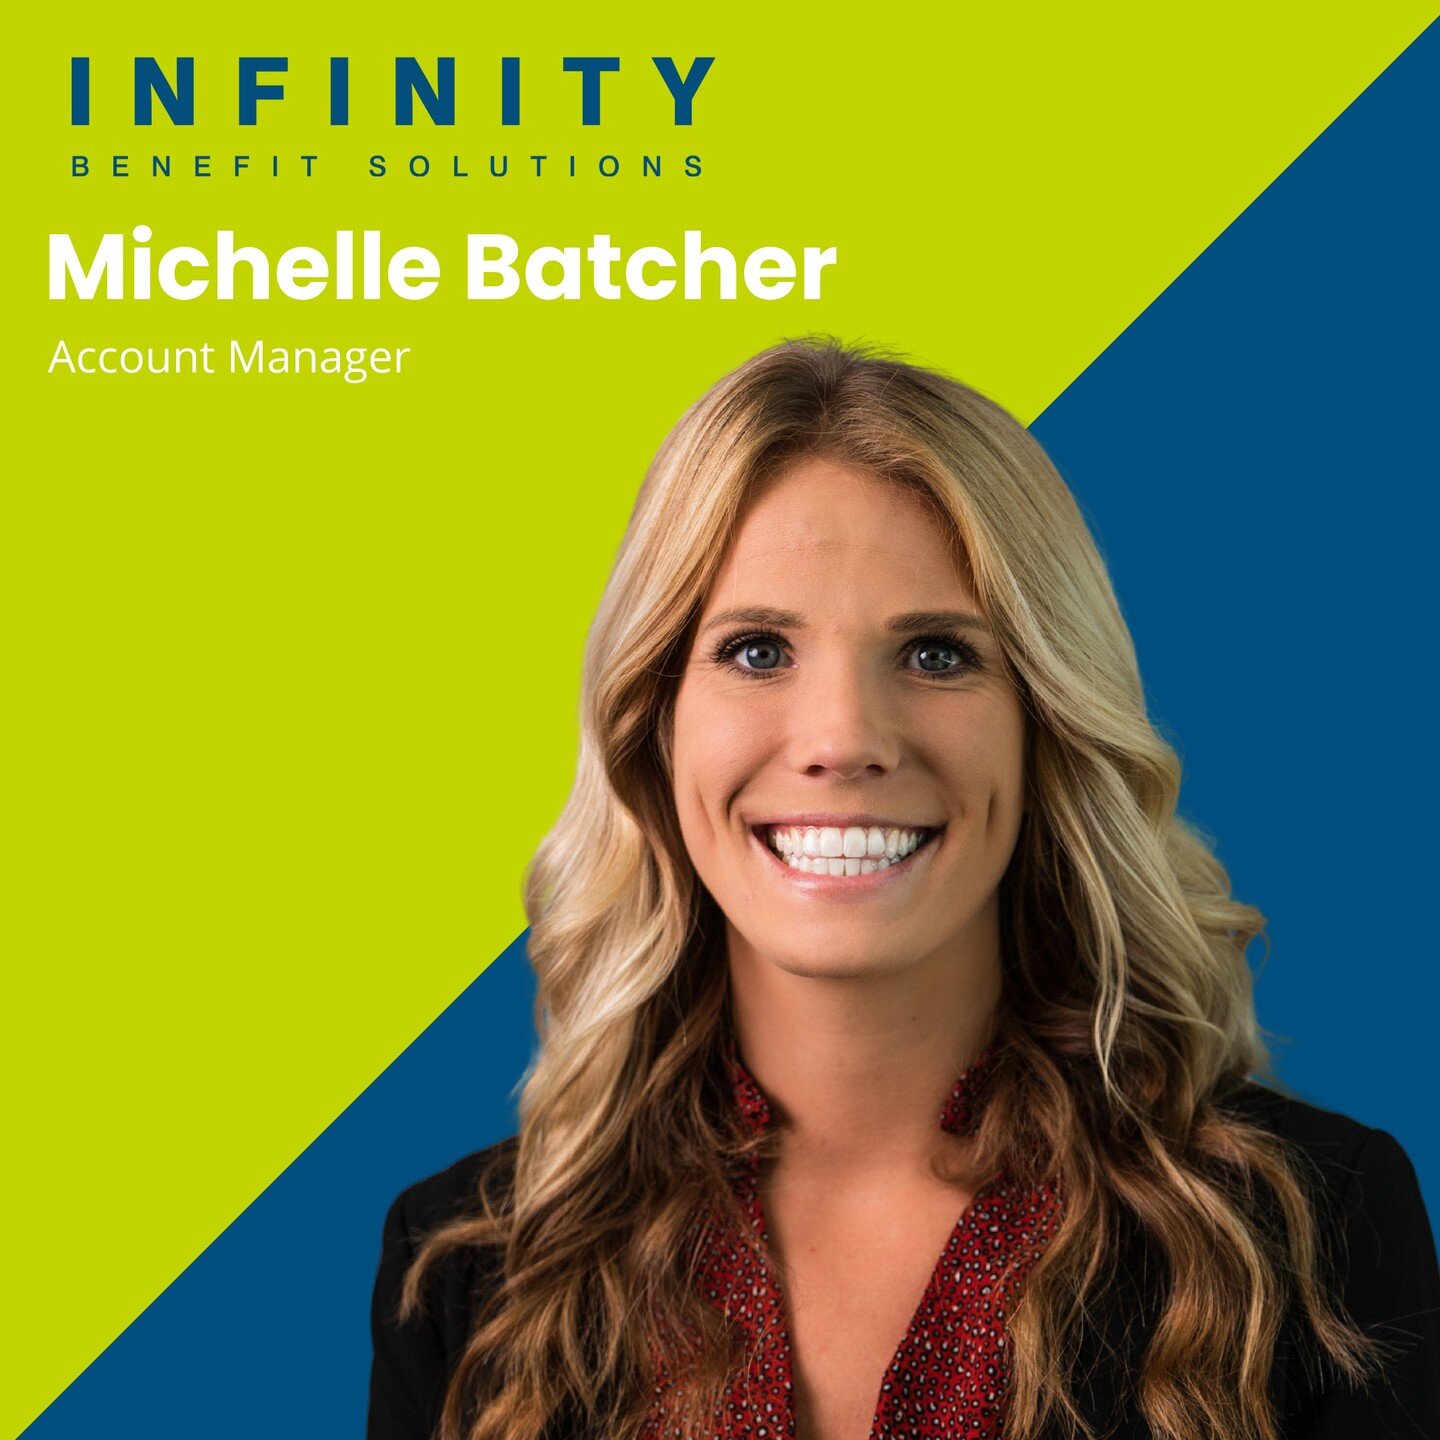 Please help us welcome Michelle Batcher, our new Account Manager at Infinity Benefit Solutions, Inc.! Before joining our team, she worked as a Talent Manager in the staffing and recruiting field for four years. Michelle specializes in/works with clie